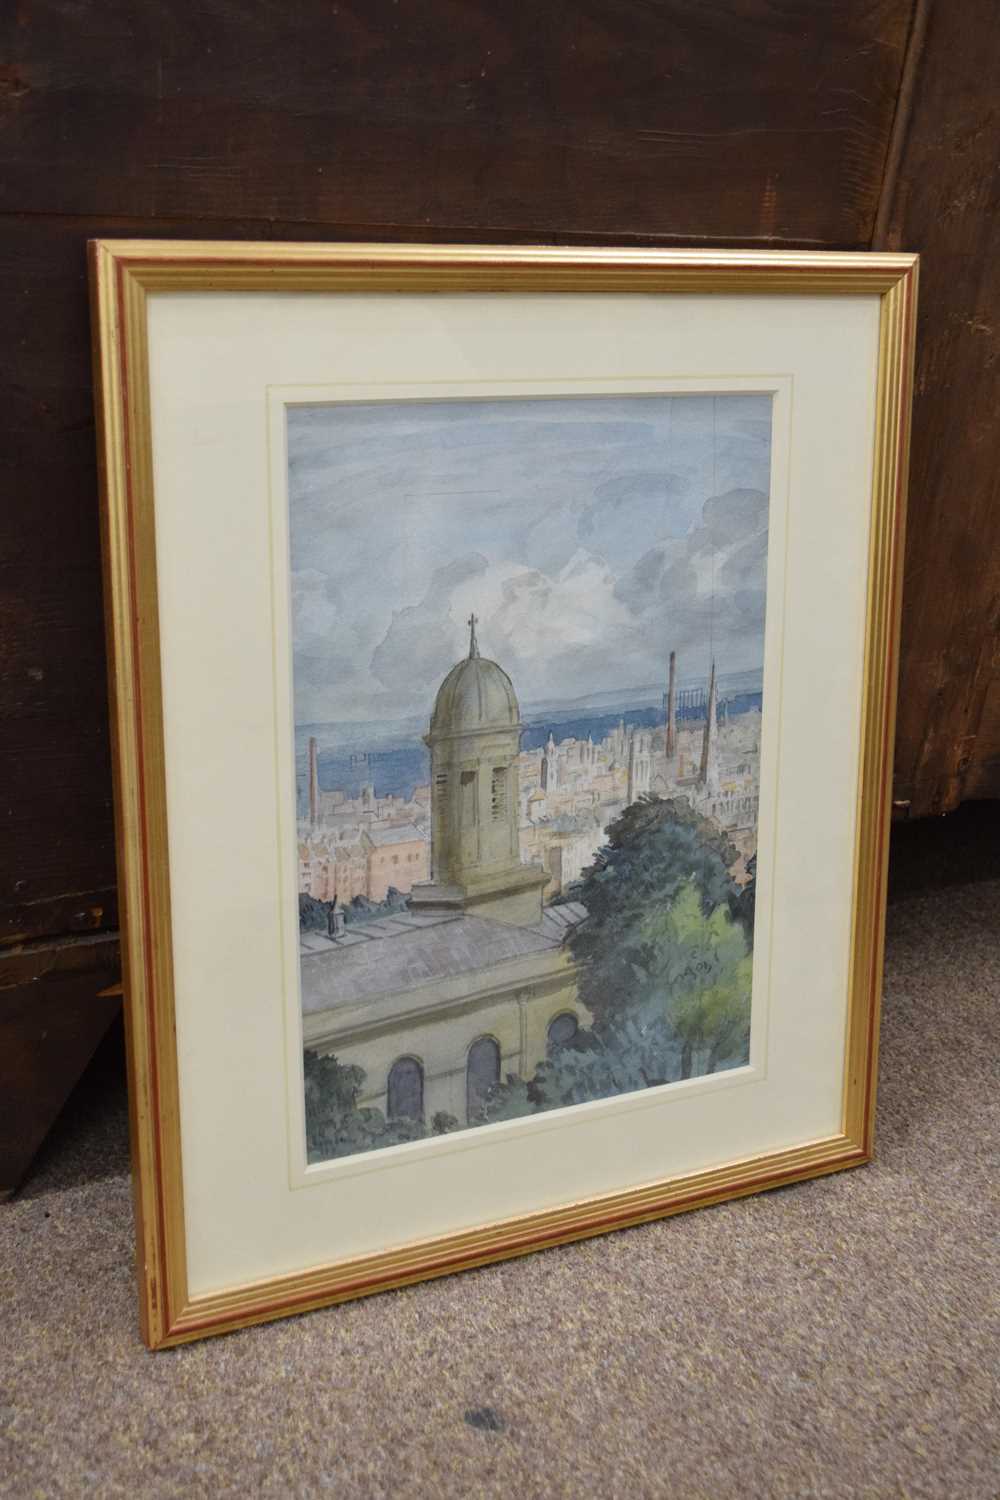 Cecil Kennedy (1898-1968) - Watercolour - 'From St. George's Chapel, Bristol' - Image 6 of 6